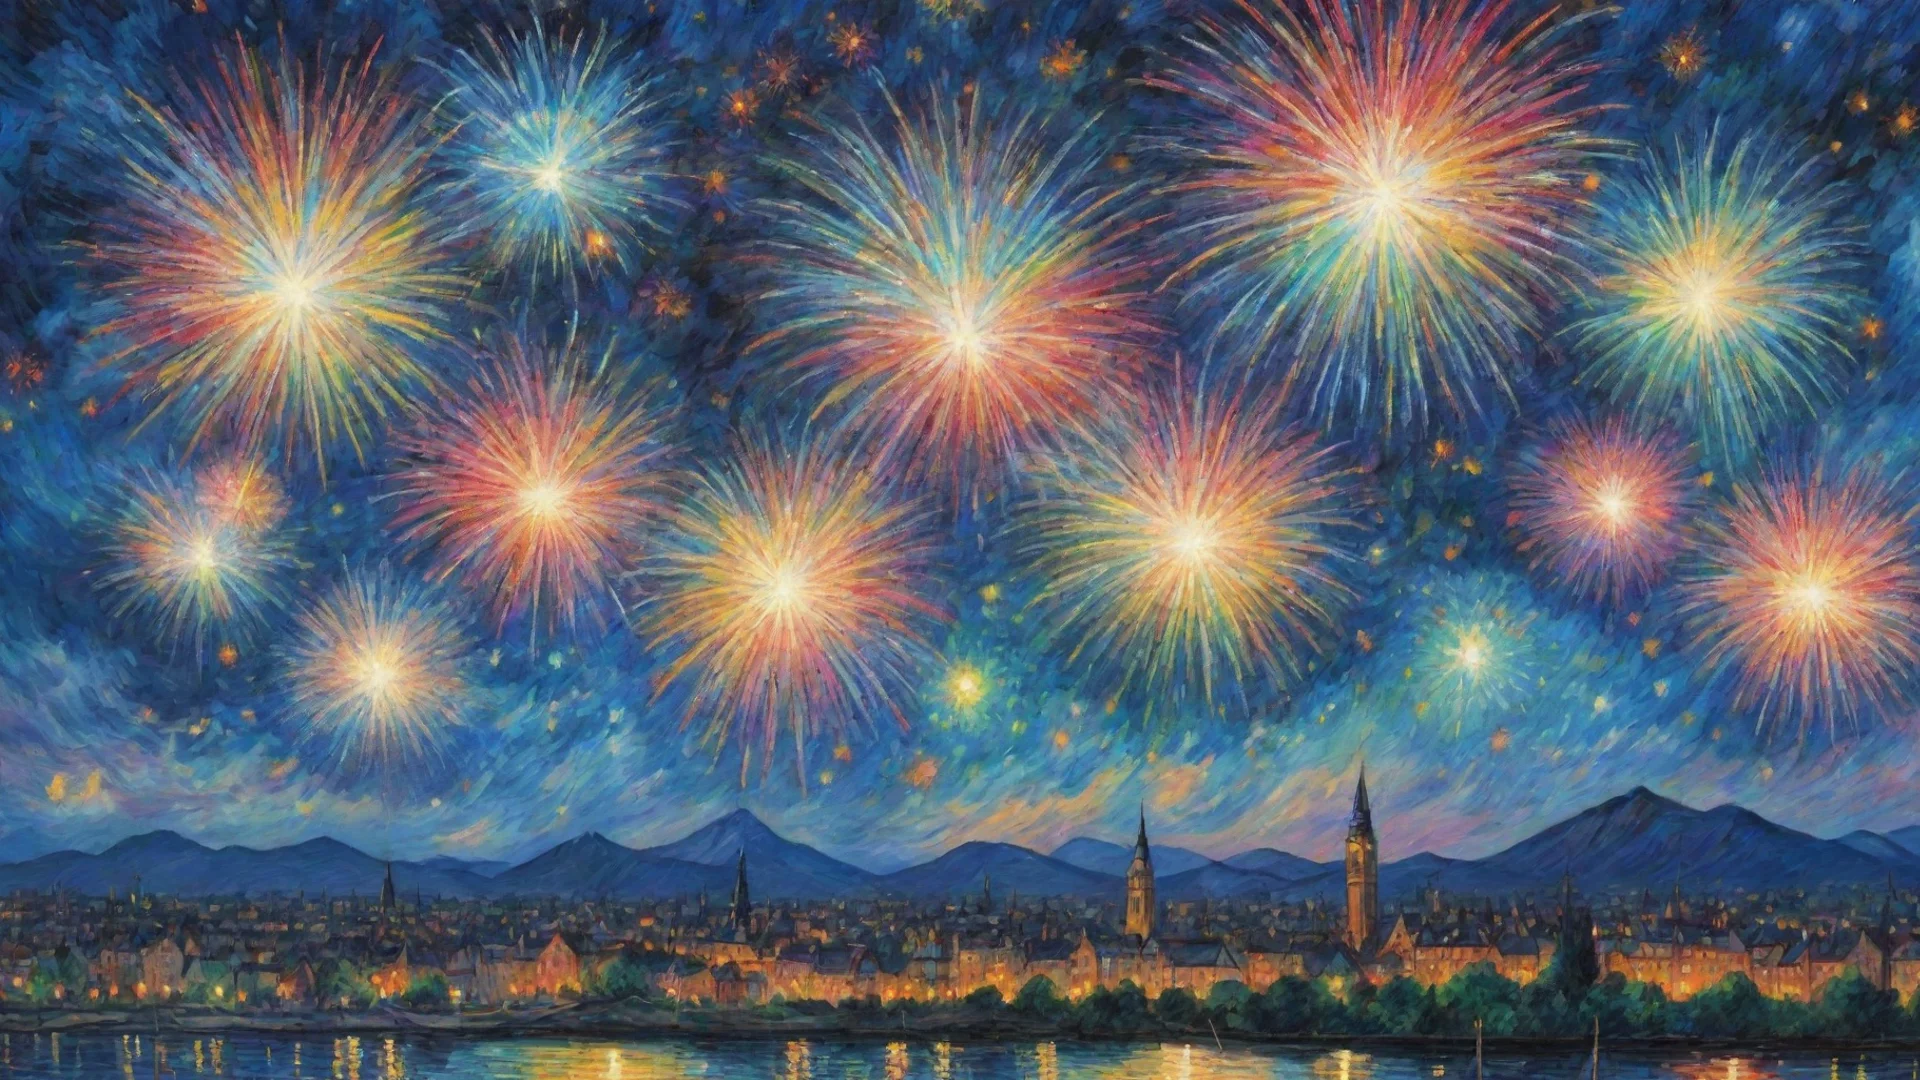 amazing fireworks in sky epic lovely artistic ghibli van gogh happyness bliss peace  detailed asthetic awesome portrait 2 wide